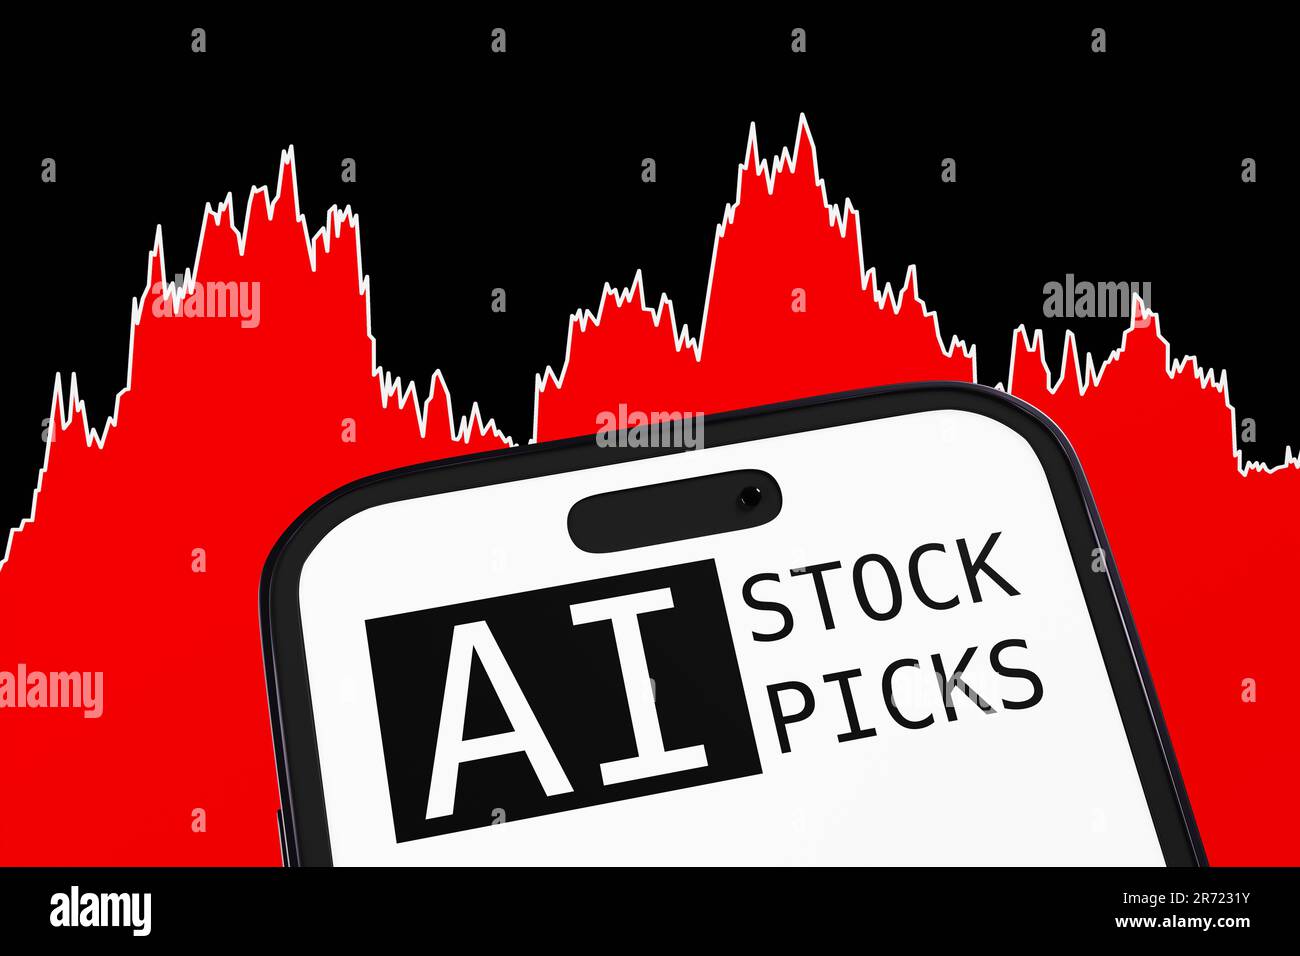 Smartphone with an app showing AI STOCK PICKS with a red stock chart as background. Concept of stock trading by artificial intelligence Stock Photo